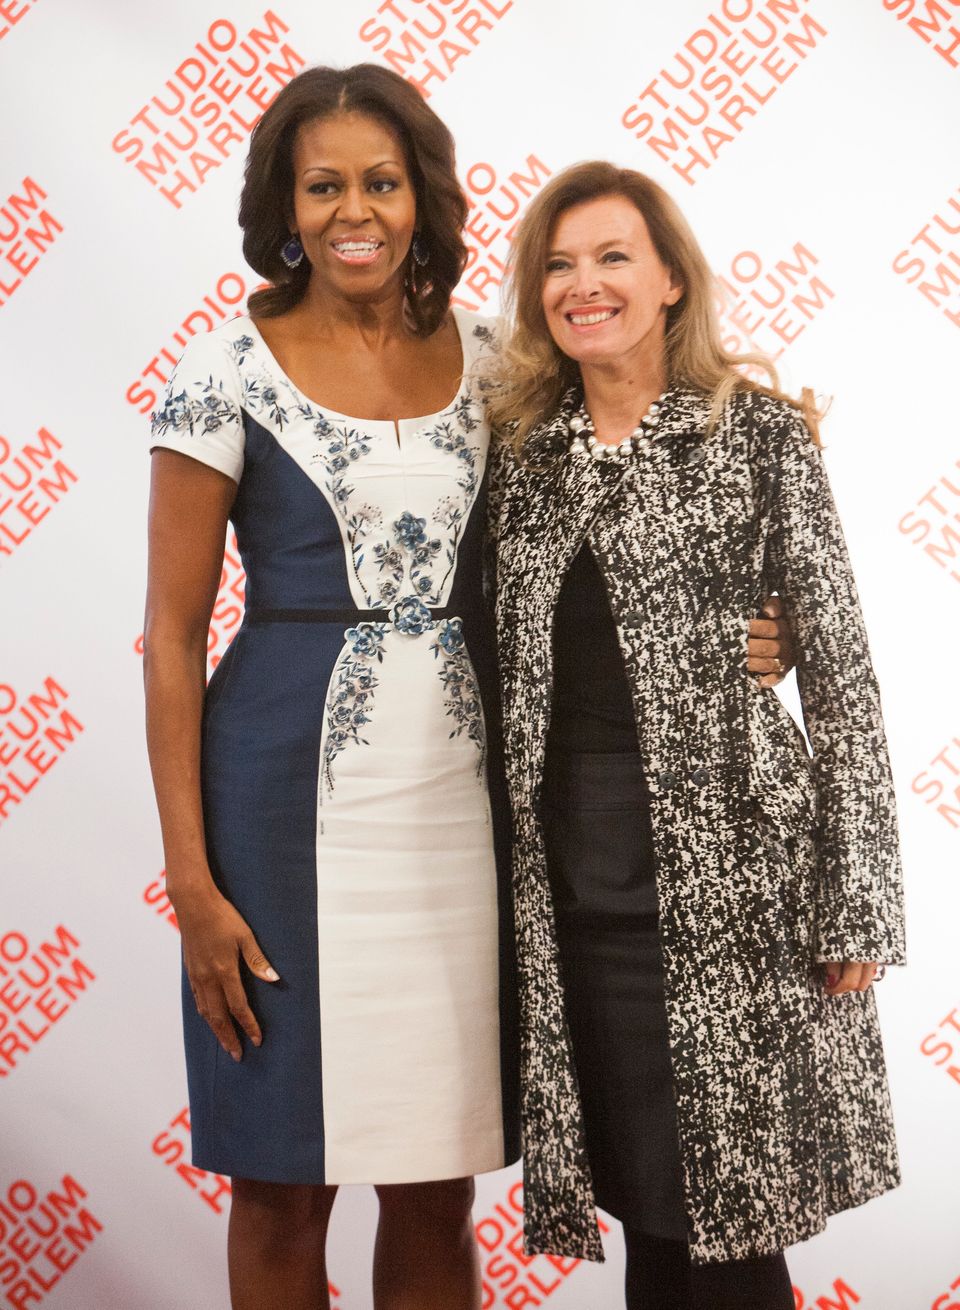 Michelle Obama & Valerie Trierweiler, "first lady" of France